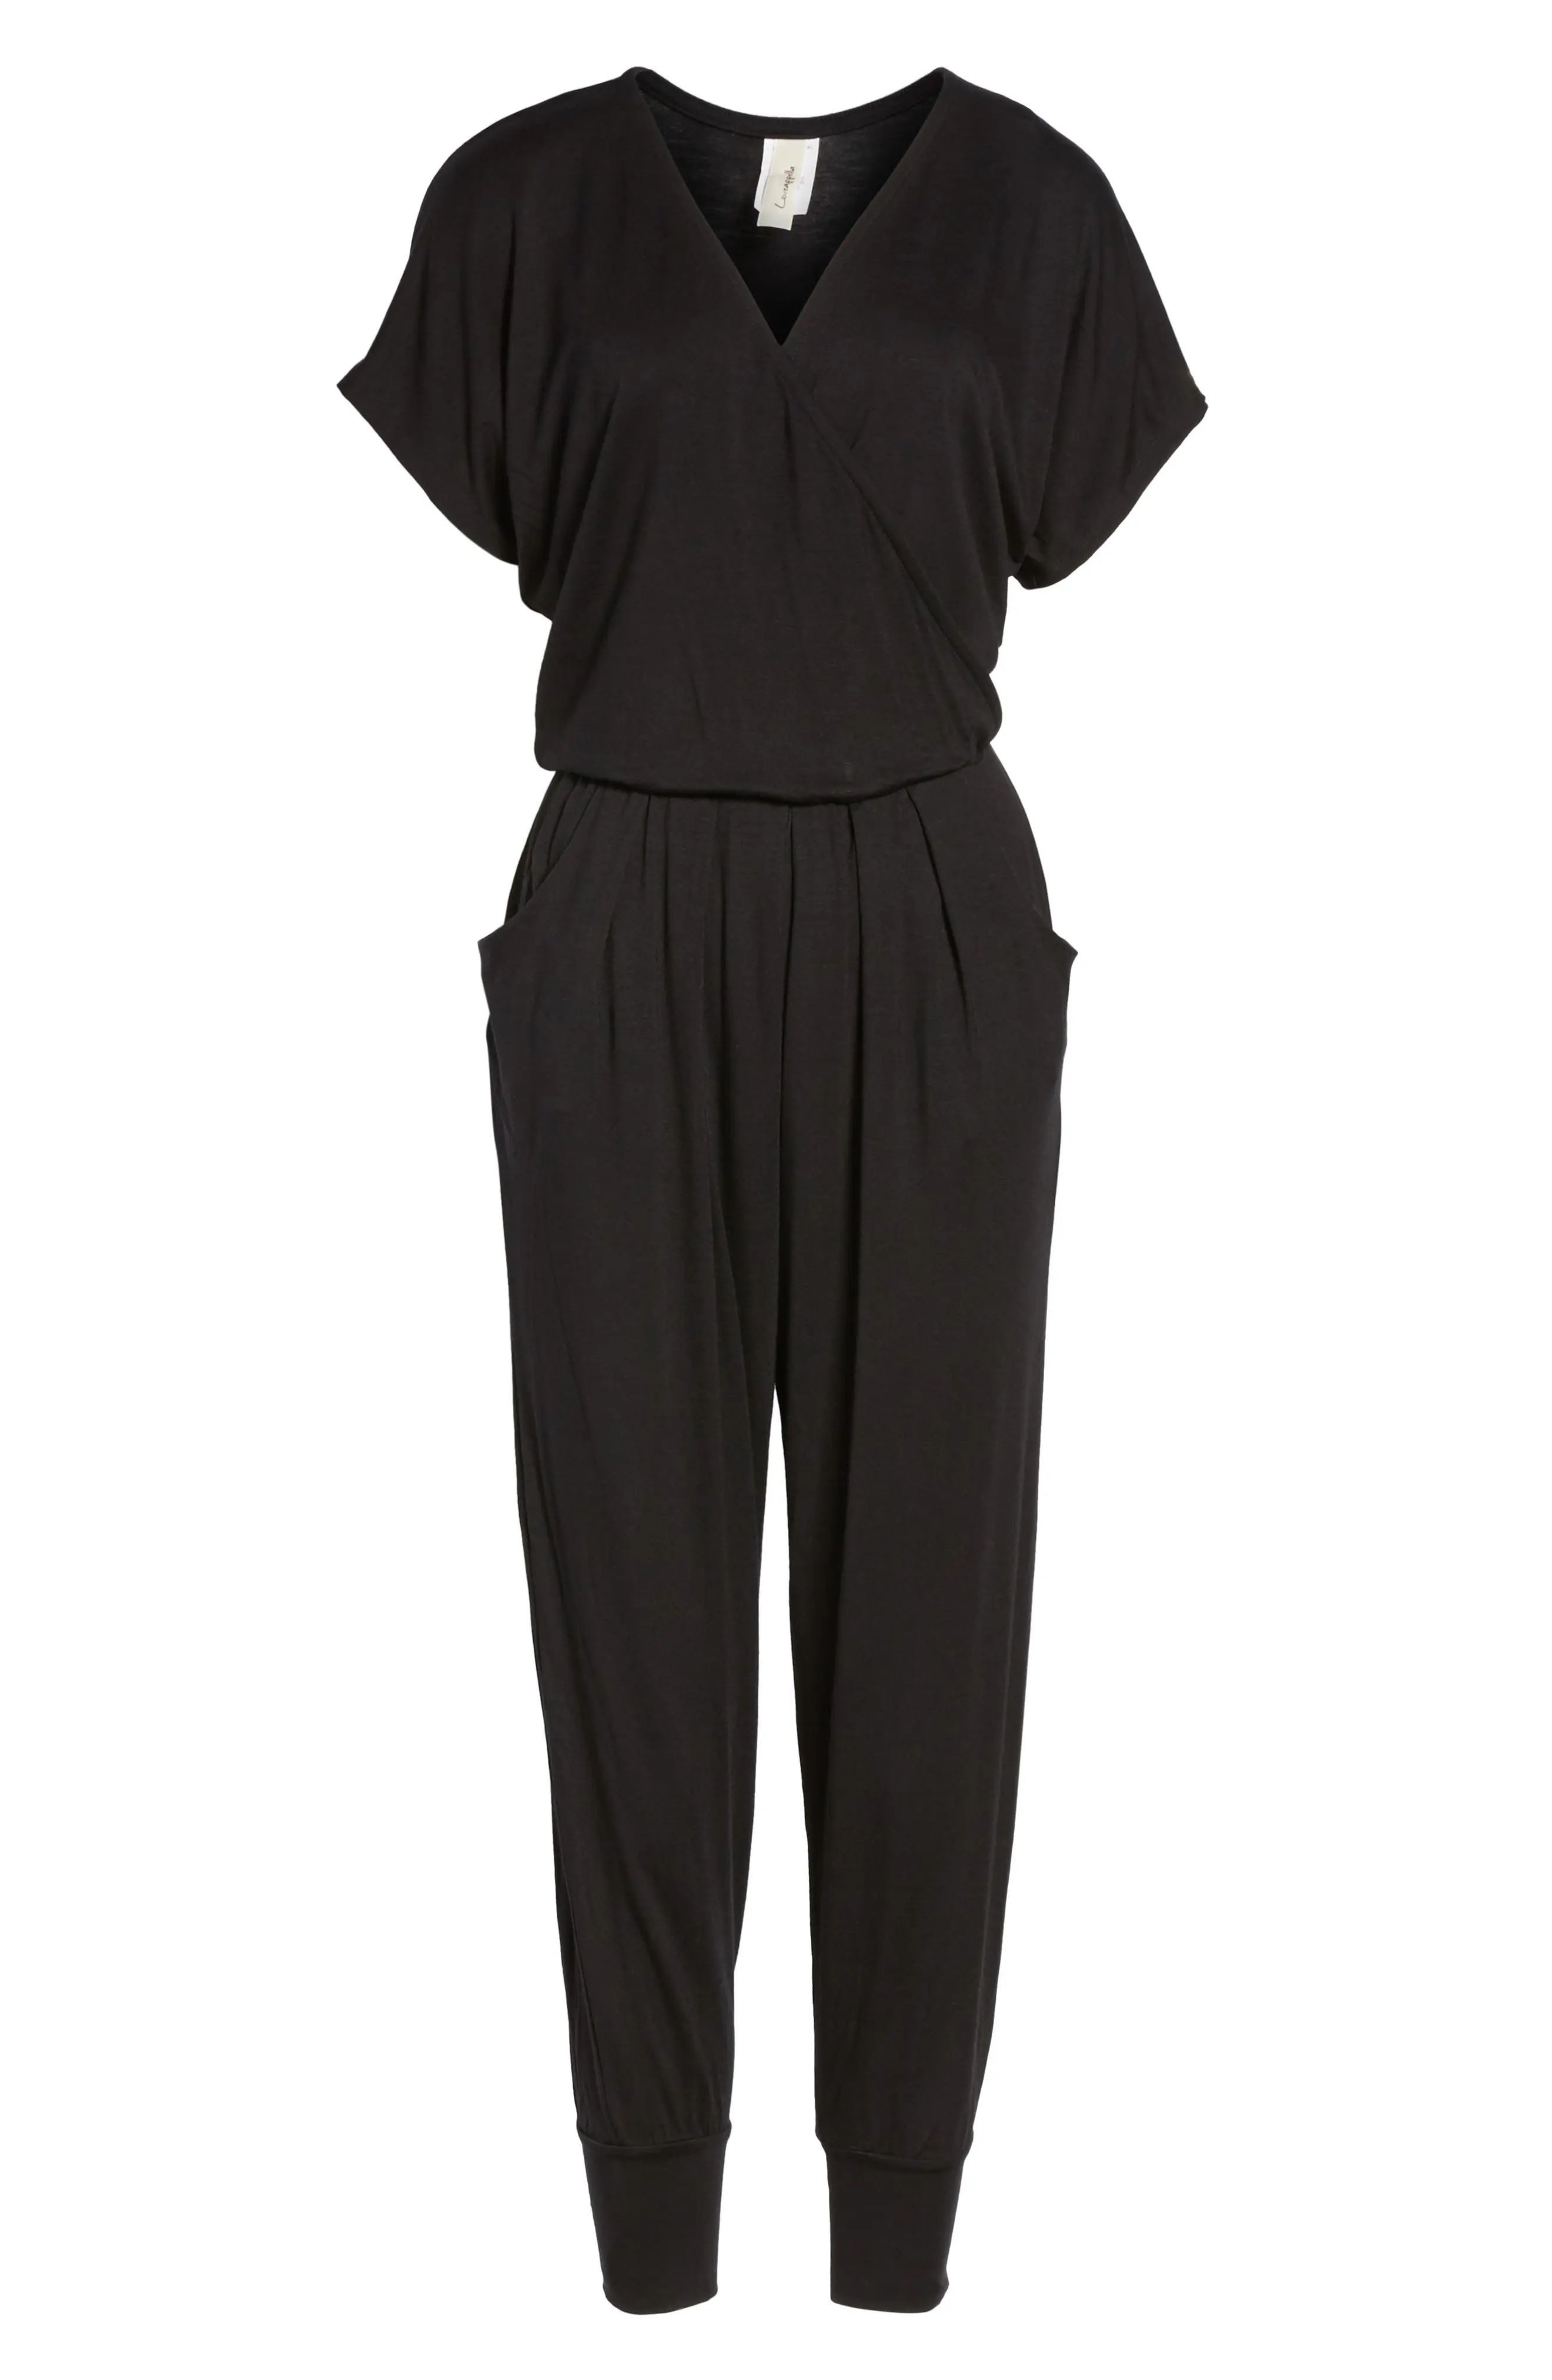 Women's Loveappella Short Sleeve Wrap Top Jumpsuit, Size X-Small - Black | Nordstrom